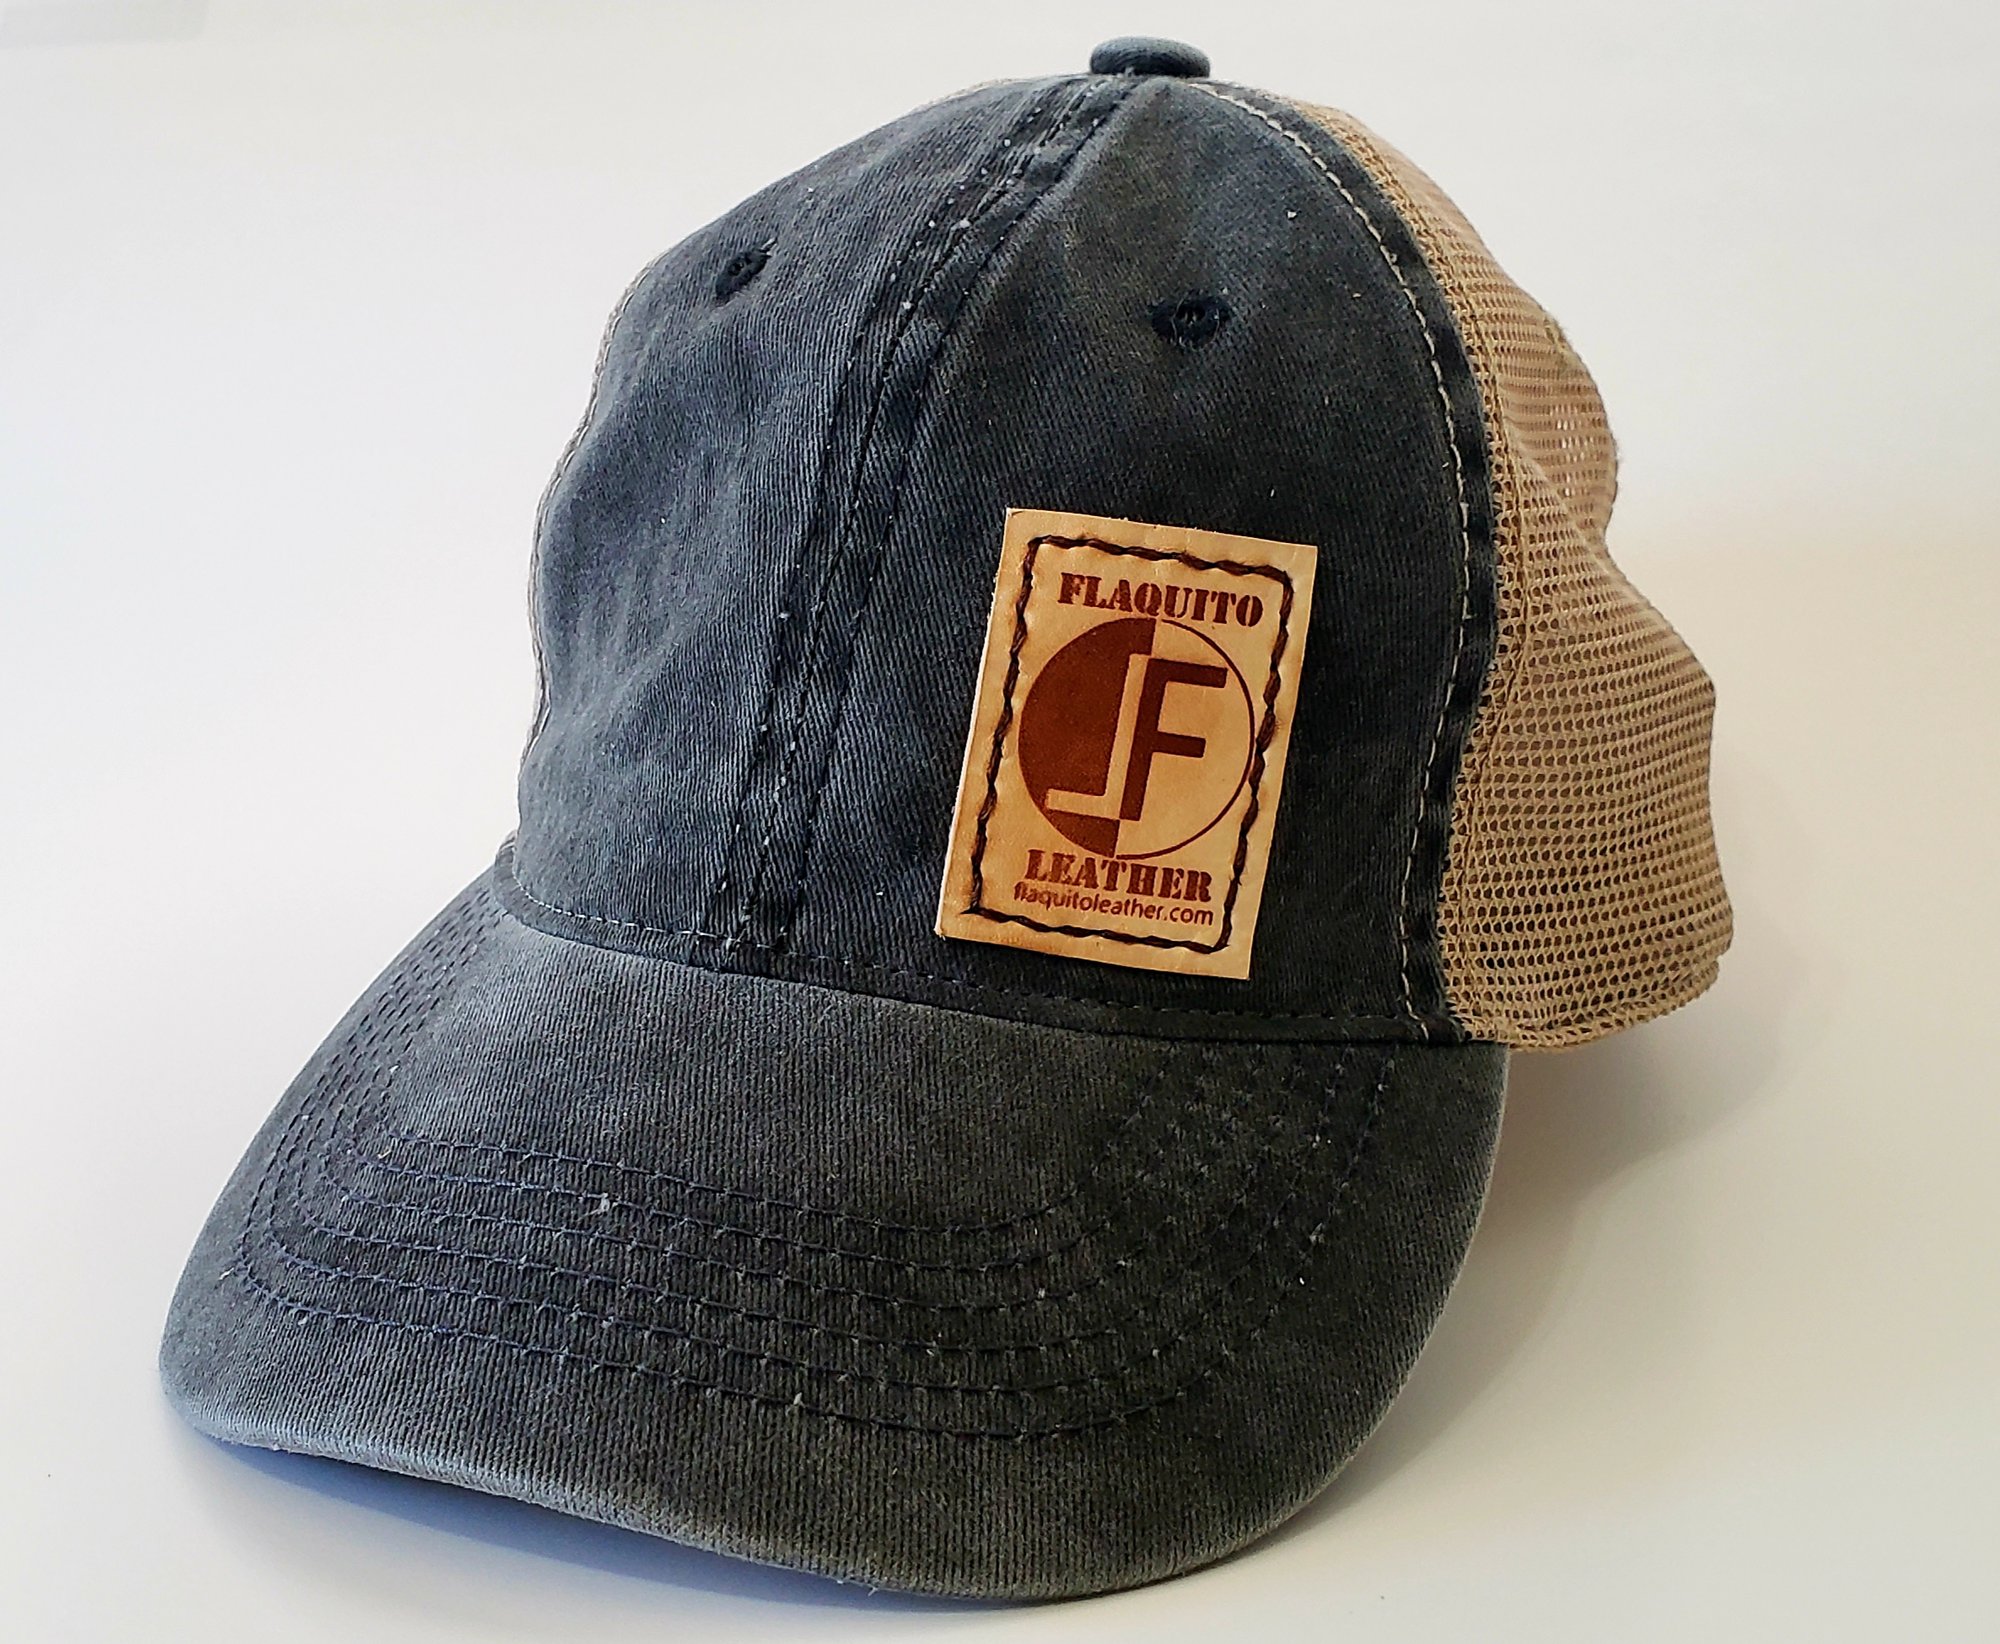 Leather Patch Trucker Hat. Flaquito Leather | Flaquito Leather